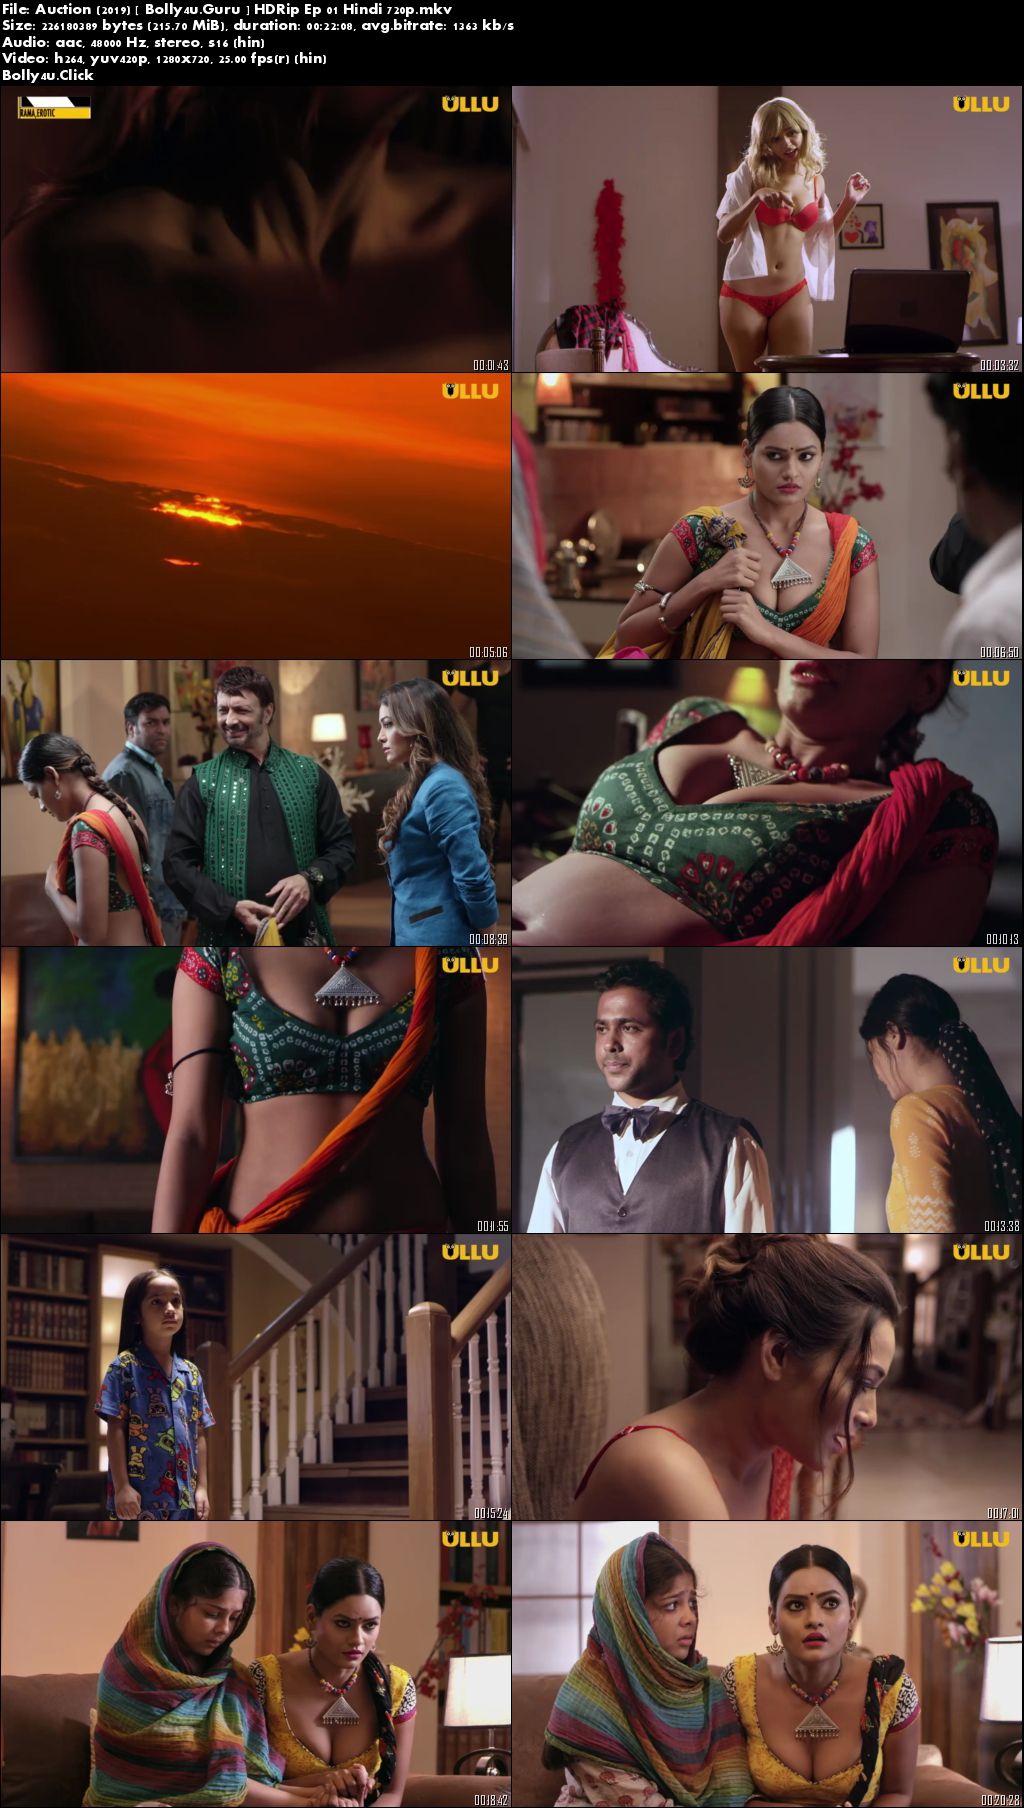 18+ Auction 2019 HDRip 950MB Hindi Complete S01 Download 720p